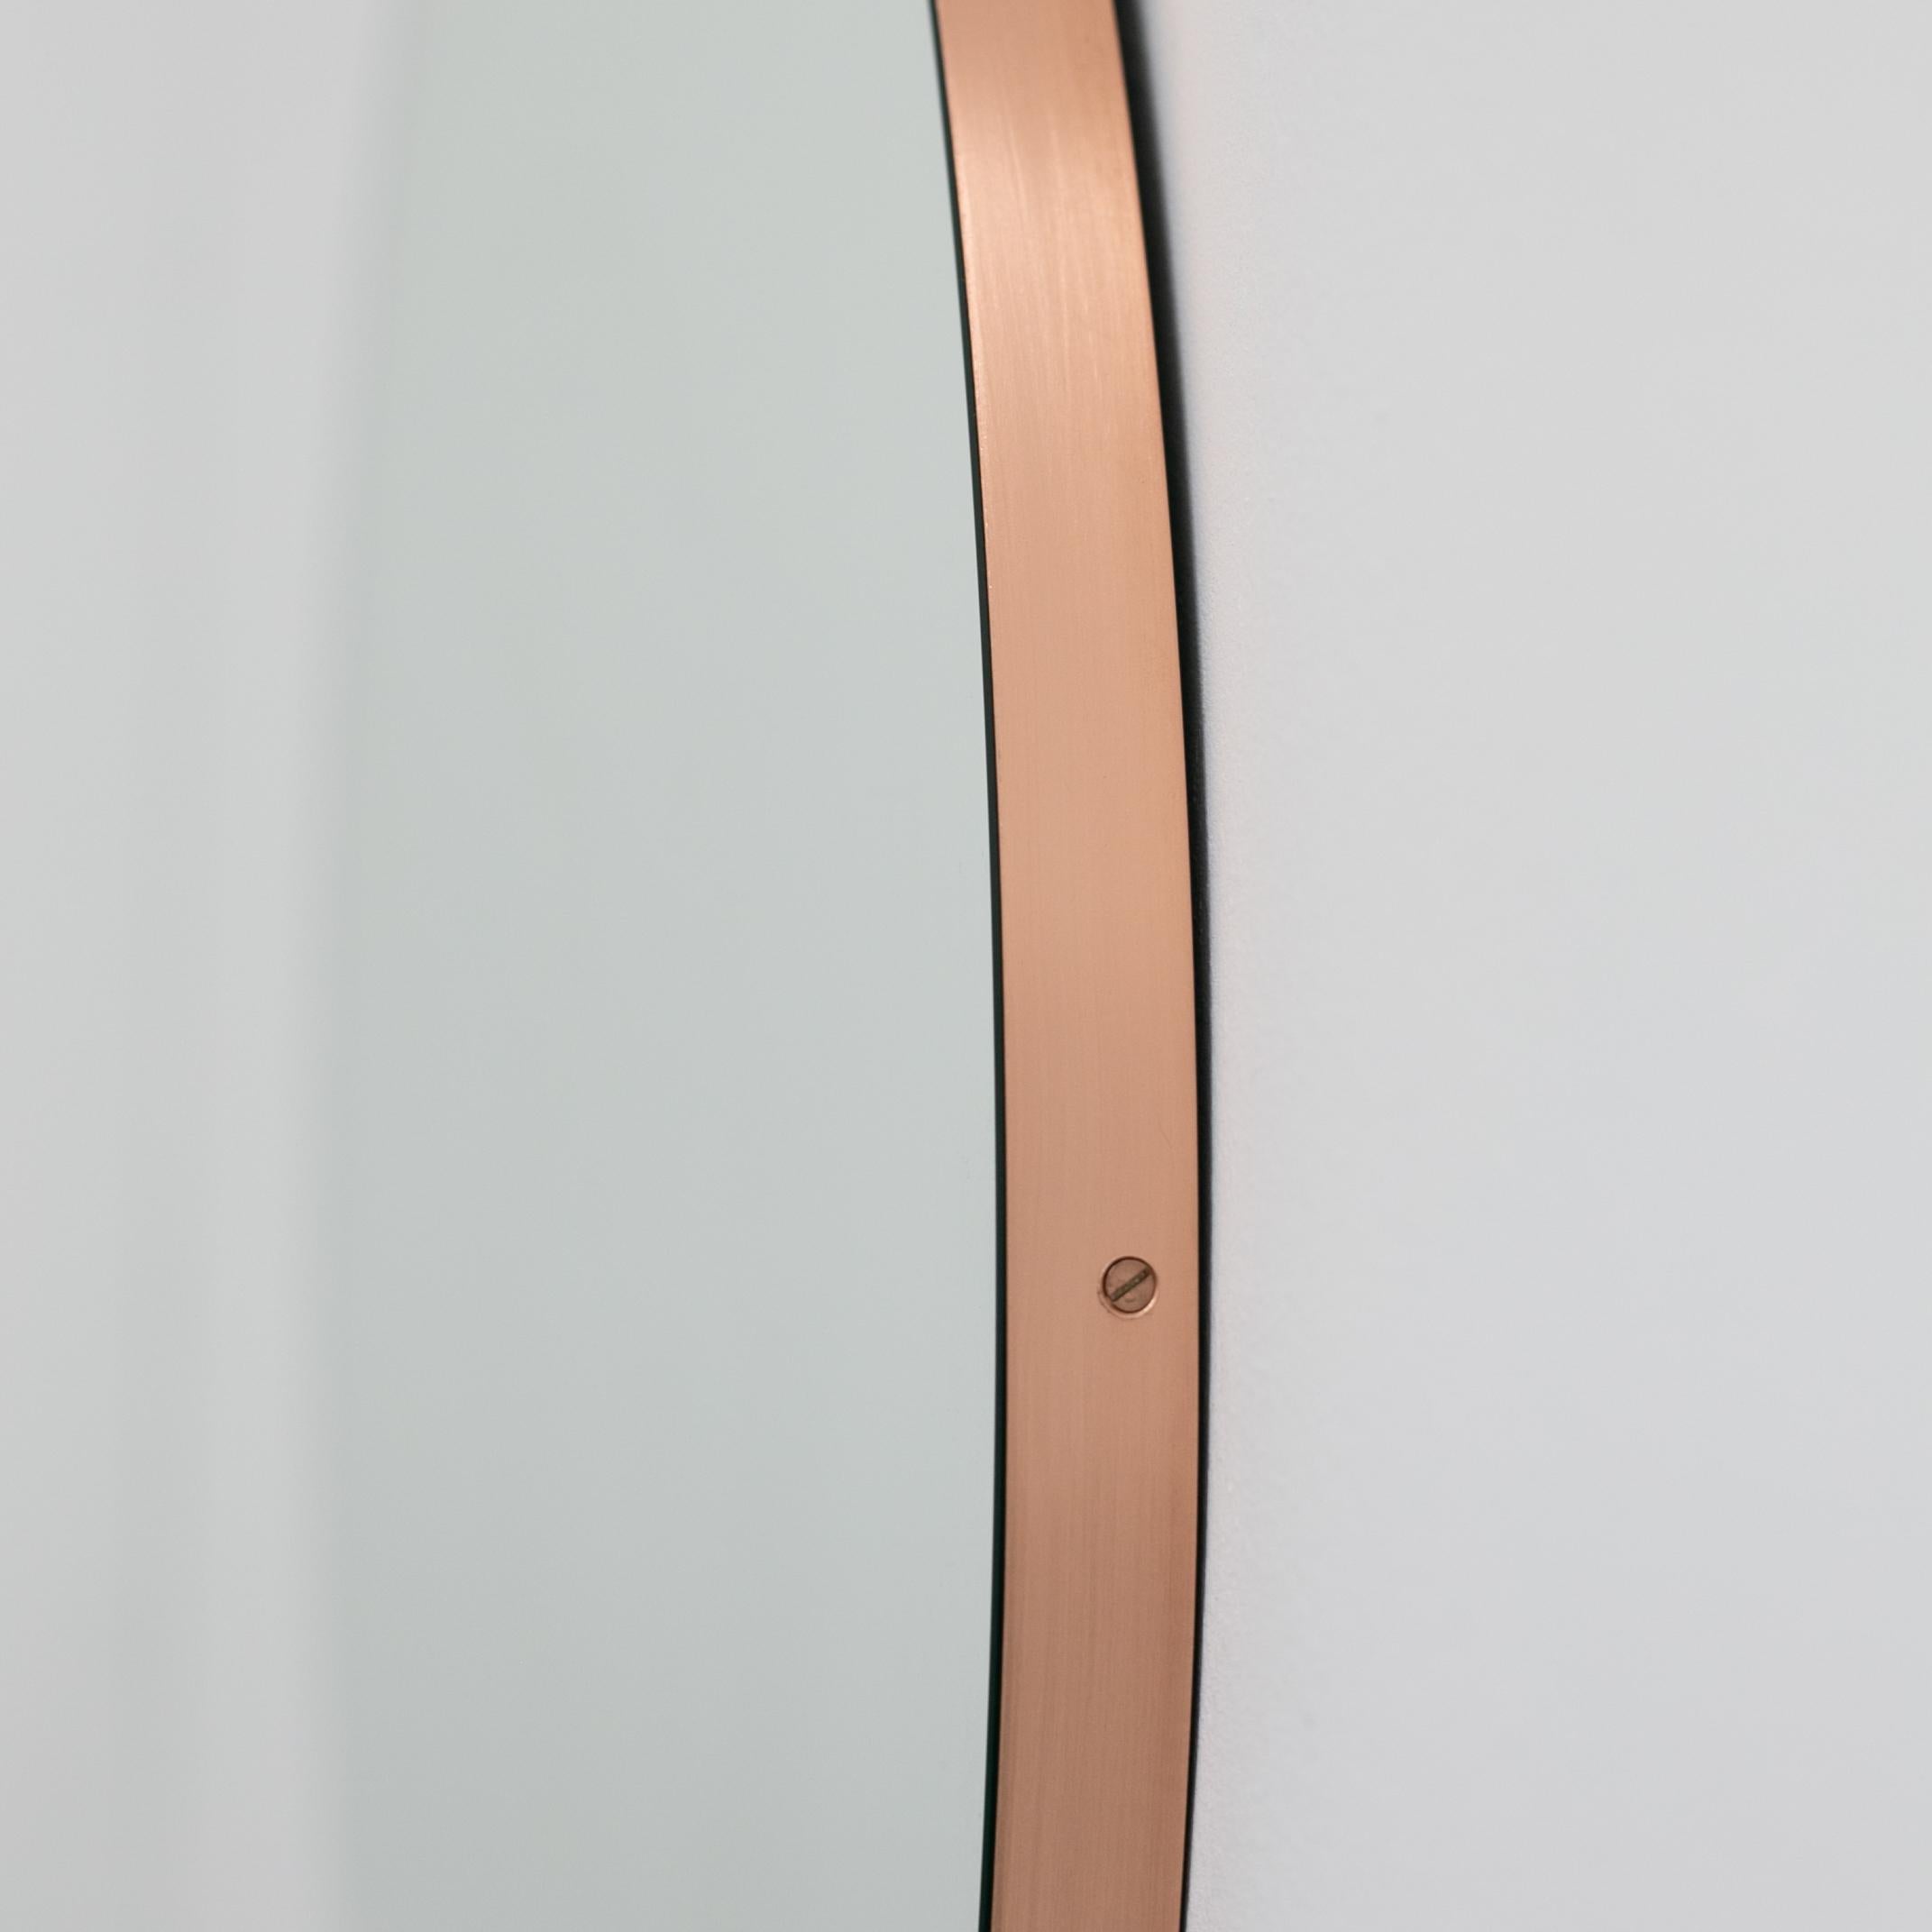 Orbis Round Modern Minimalist Handcrafted Mirror with Copper Frame, Large For Sale 1